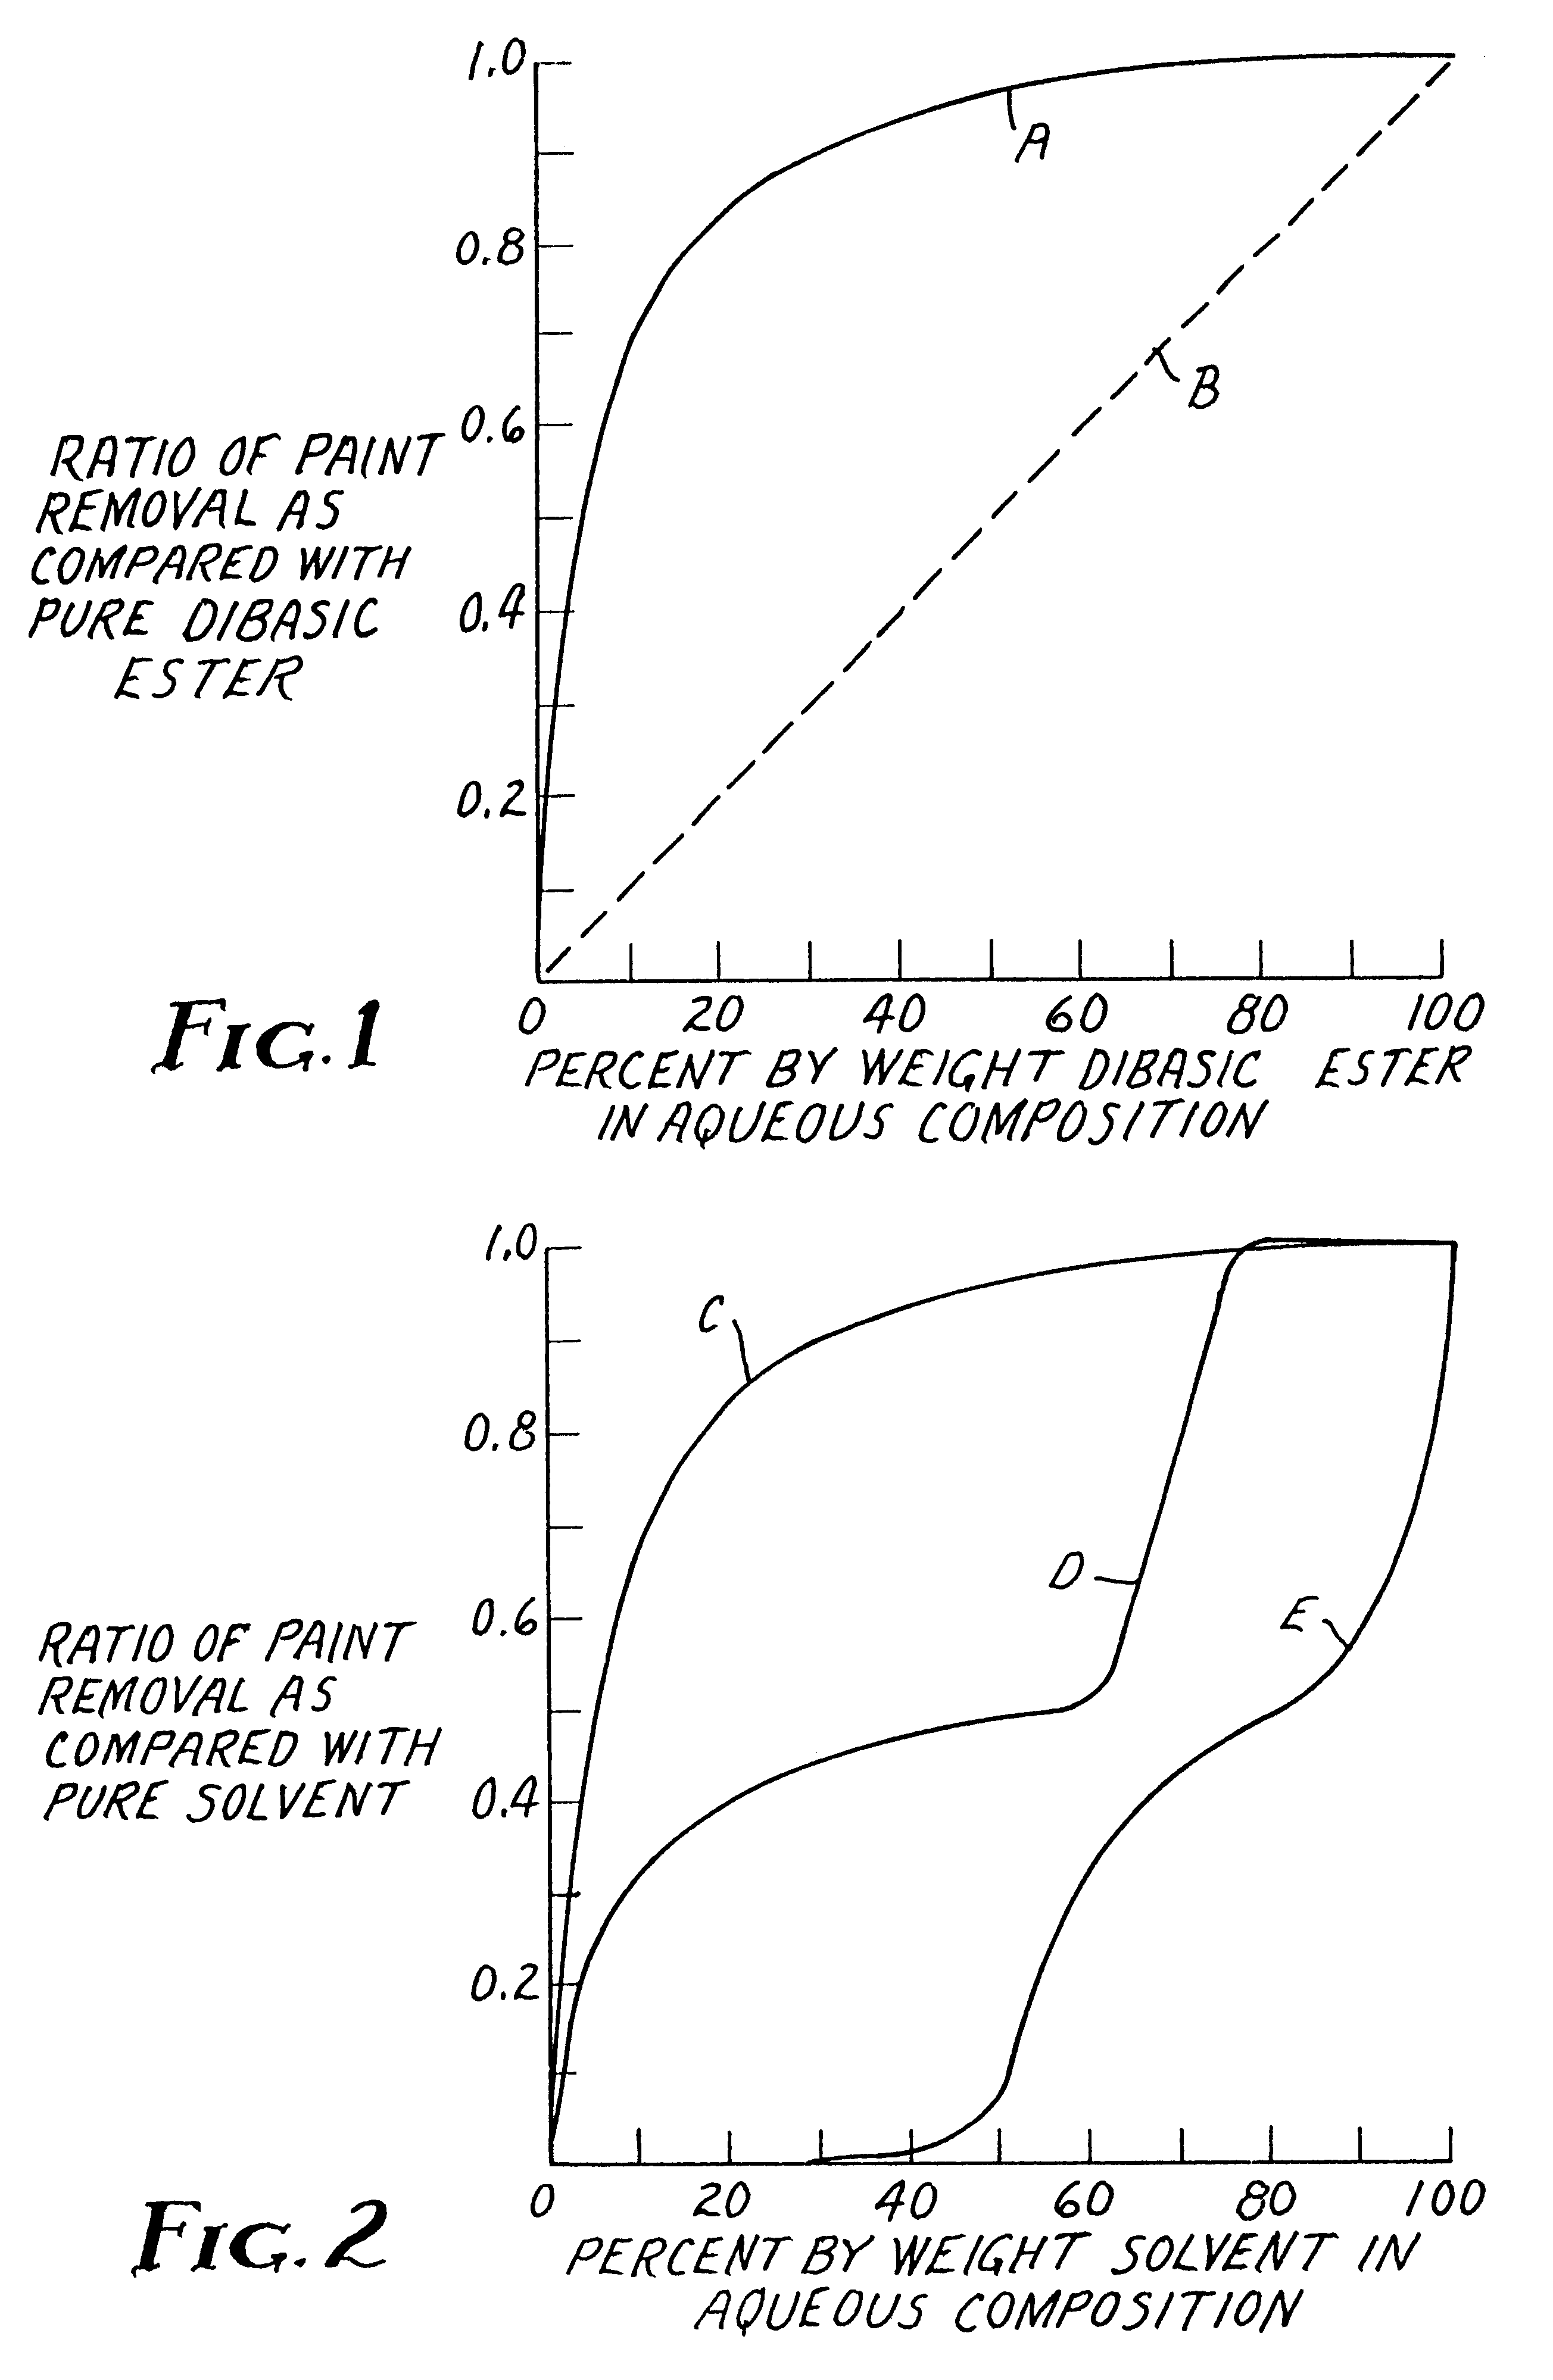 Aqueous based composition containing dibasic ester and thickening agent for removing coatings